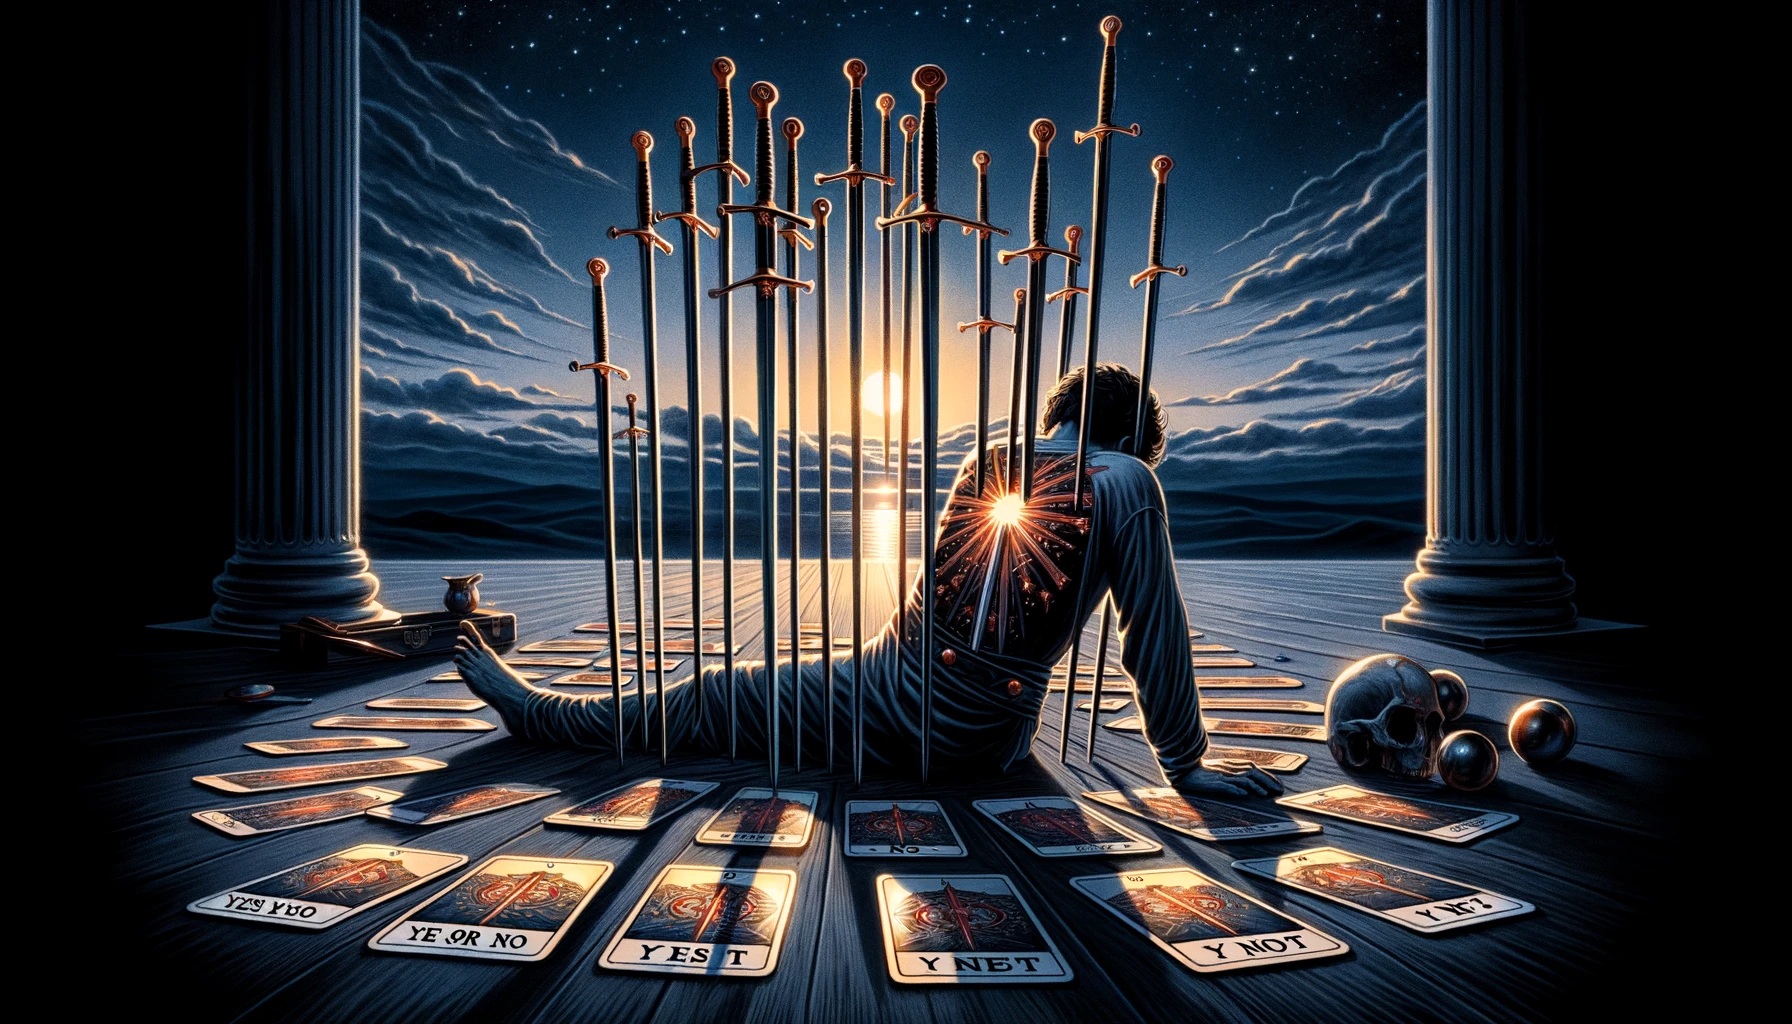 "The illustration depicts a scene of conclusion and transition, with a figure lying defeated amidst ten swords, symbolizing betrayal and the end of a challenging cycle, yet hinting at the potential for renewal and growth amid adversity."